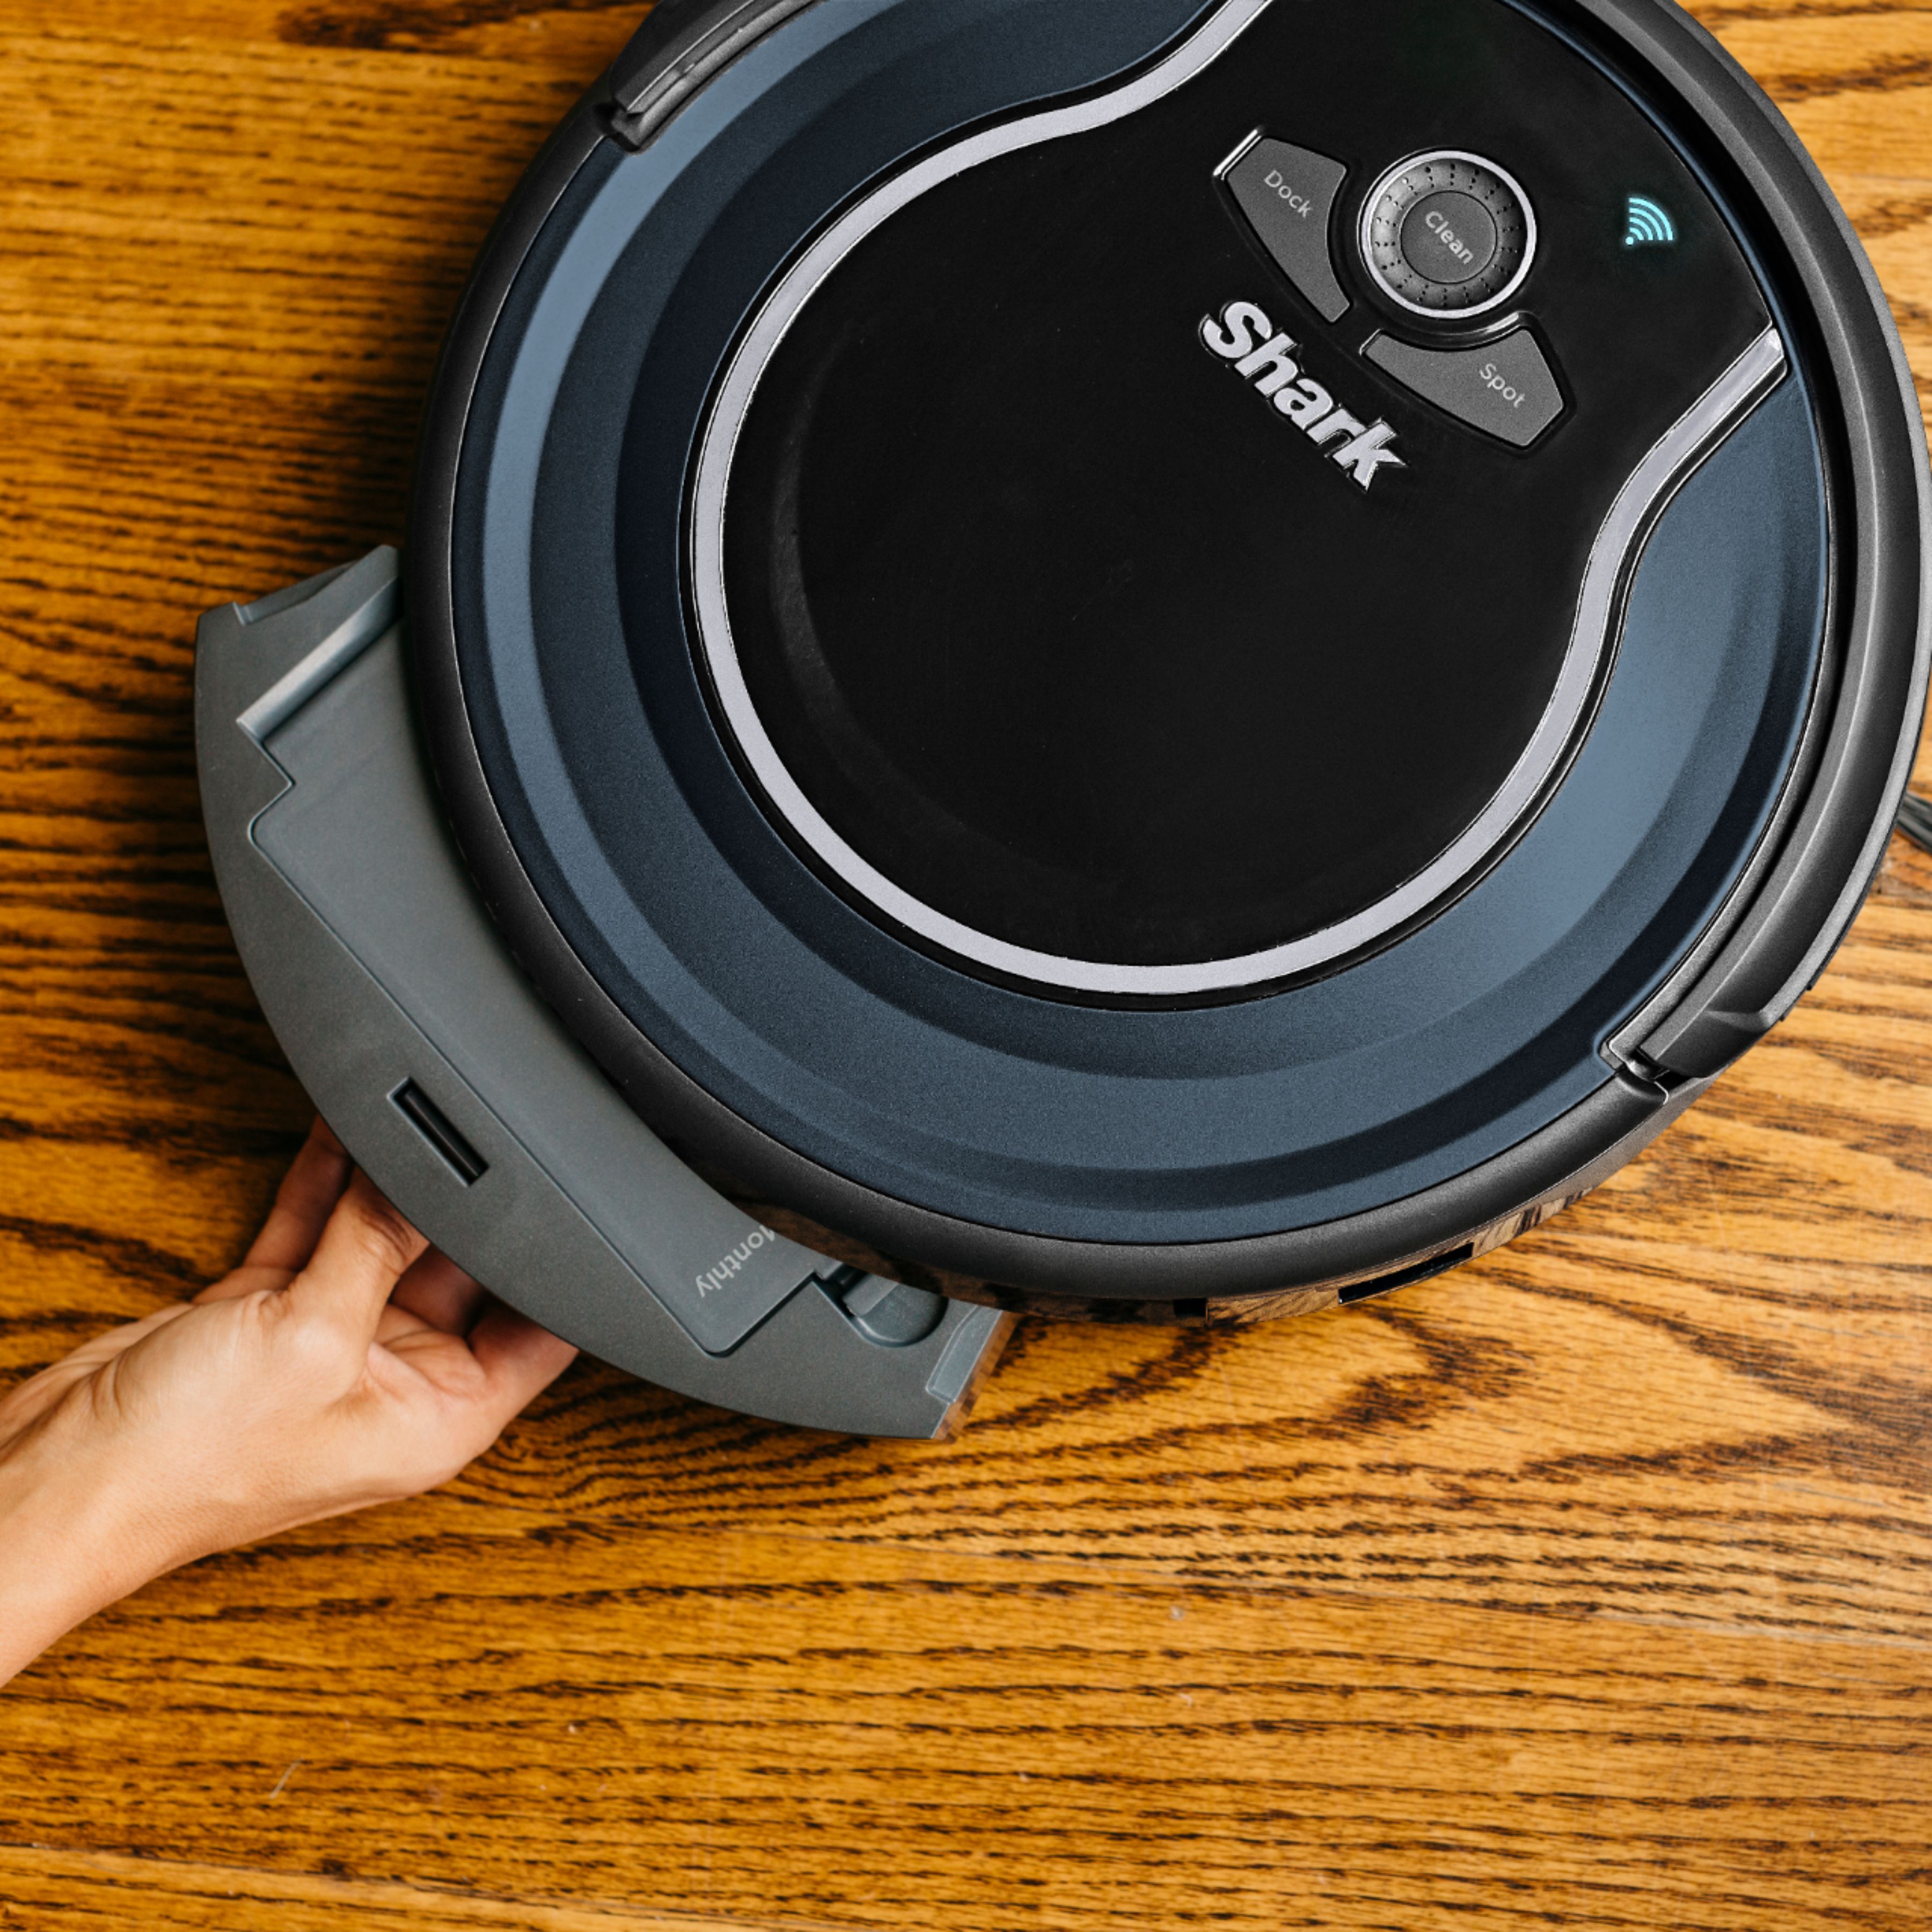 NEW R76 Shark ION Robotic Vacuum Wi-Fi Connected Multi-Surface Cleaning BLUE